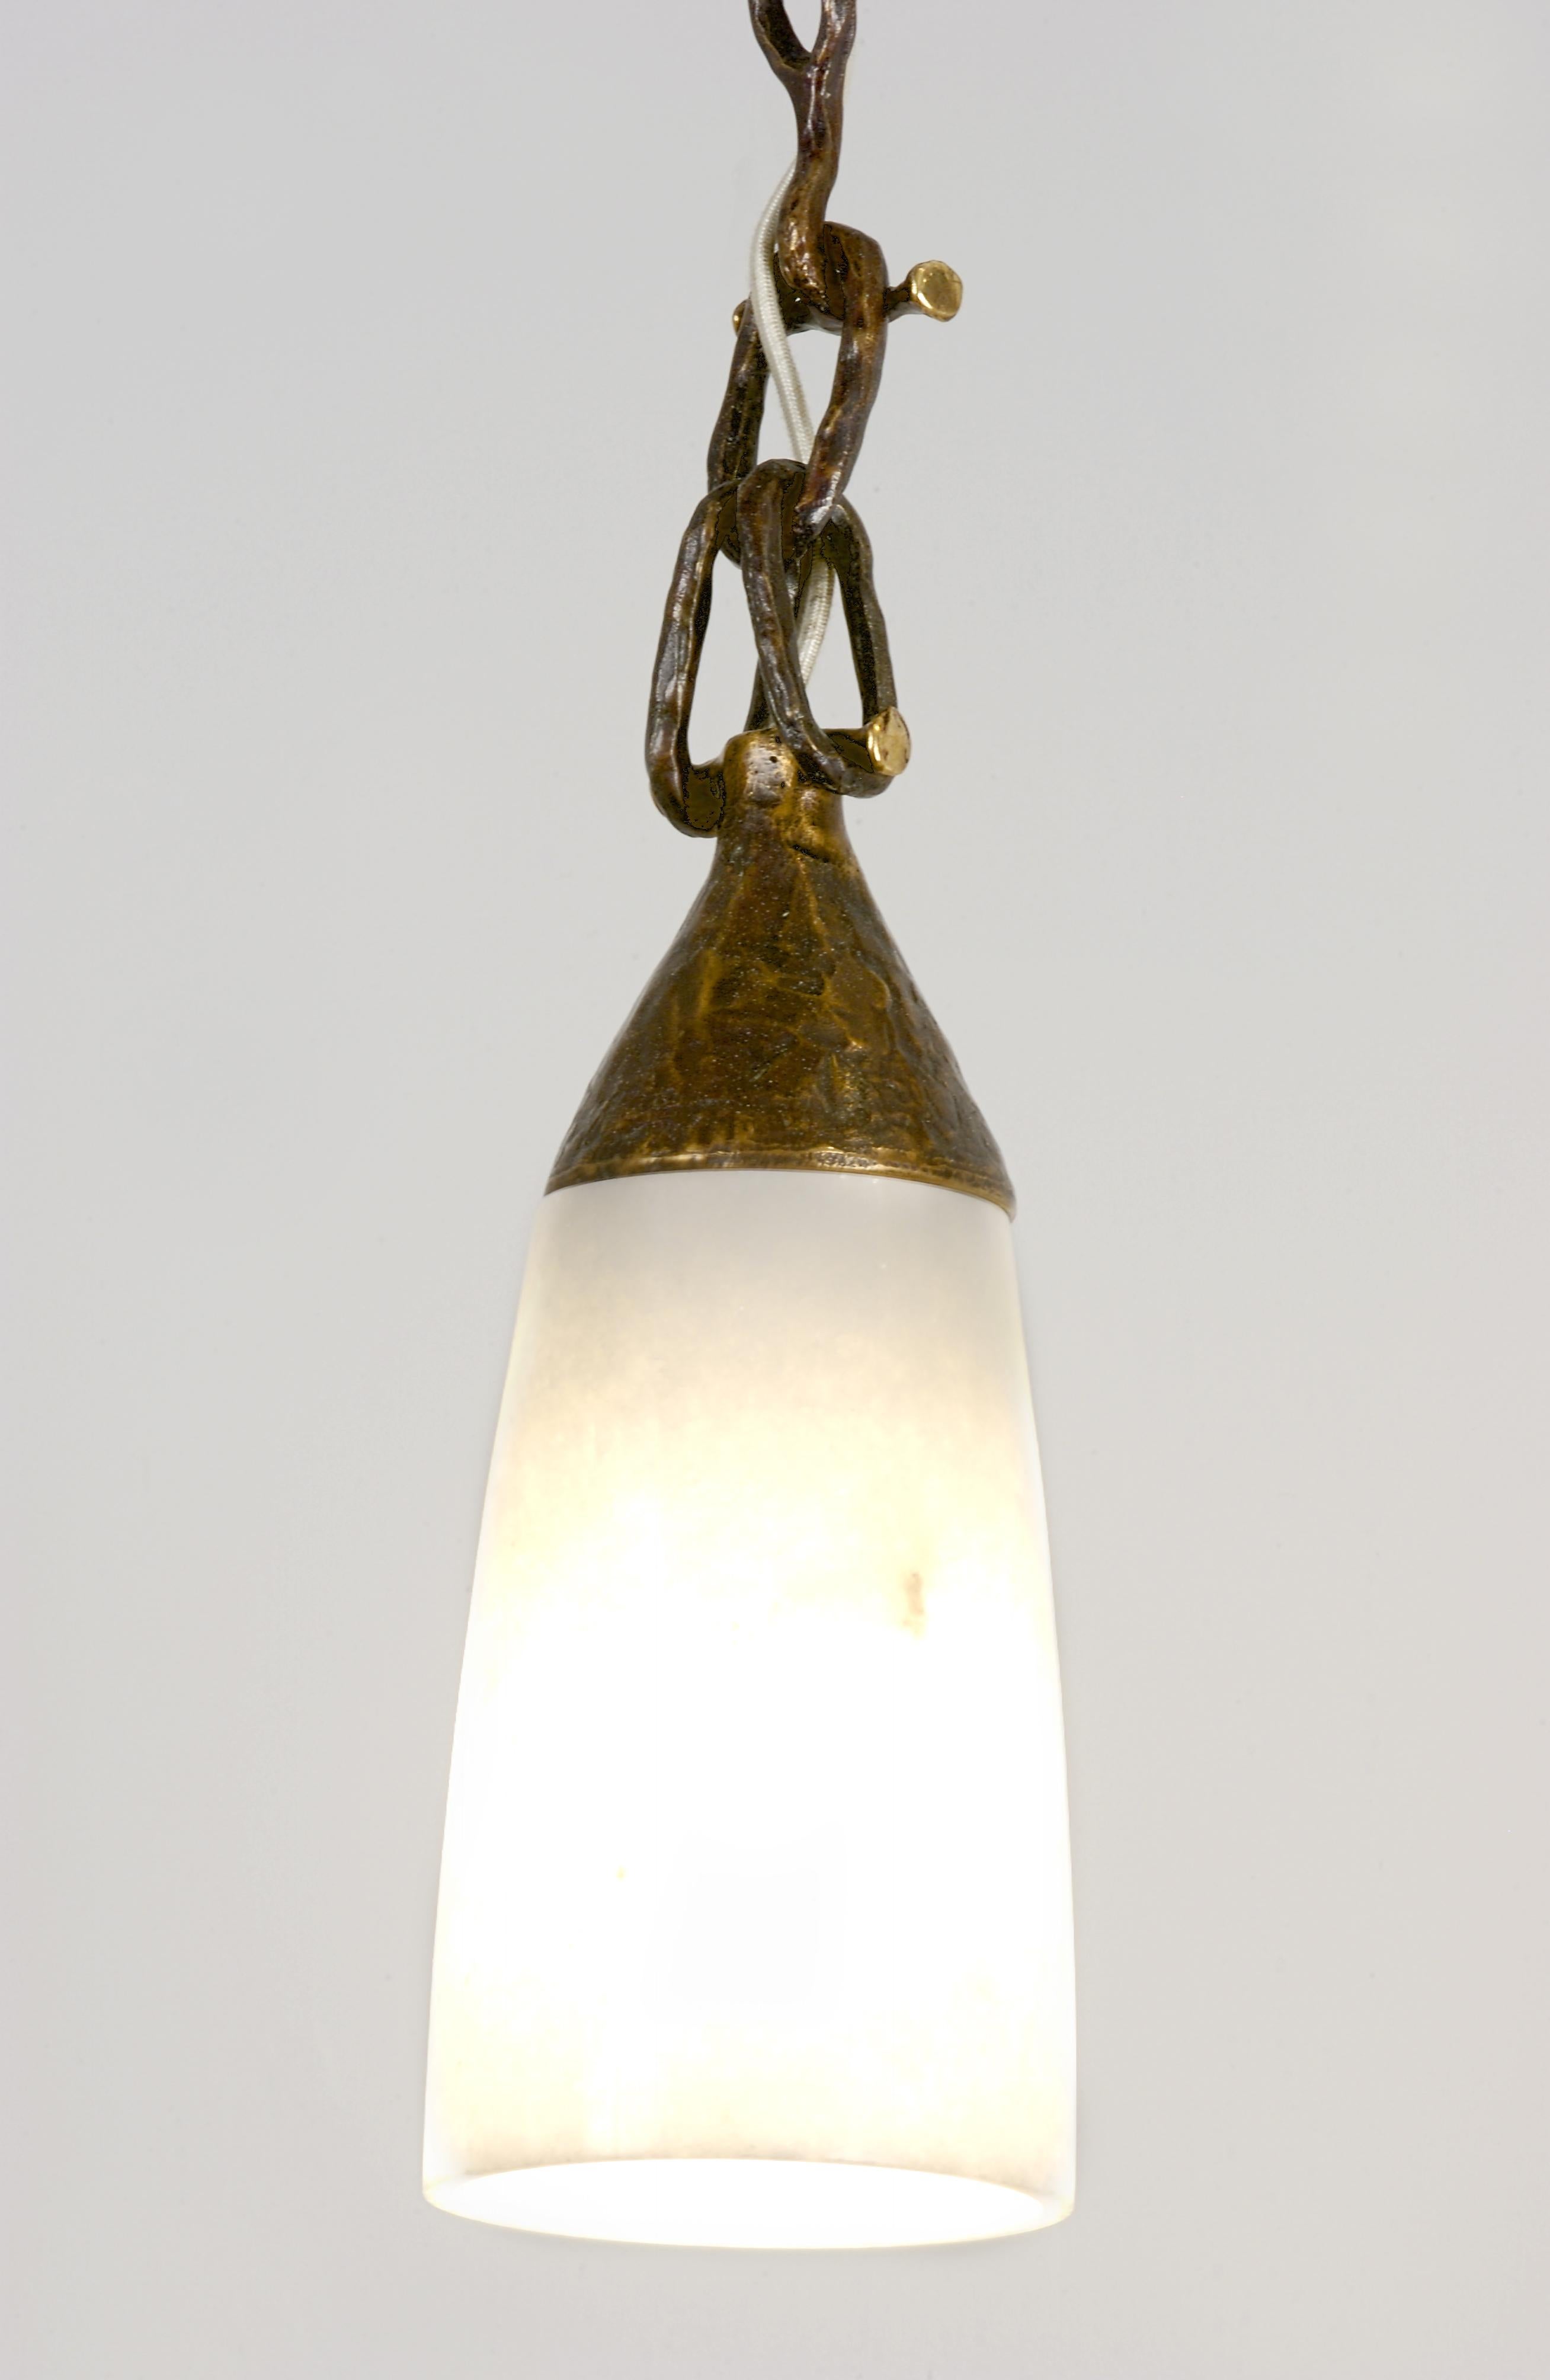 Inspired by the translucent white marble in India, Stephanie Odegard decided to backlight a delicately carved hanging cone to create an elegant and sophisticated statement in light and stone.
 
Cloche Pendant
Size-  06” x 06” x 14” H
Materials -